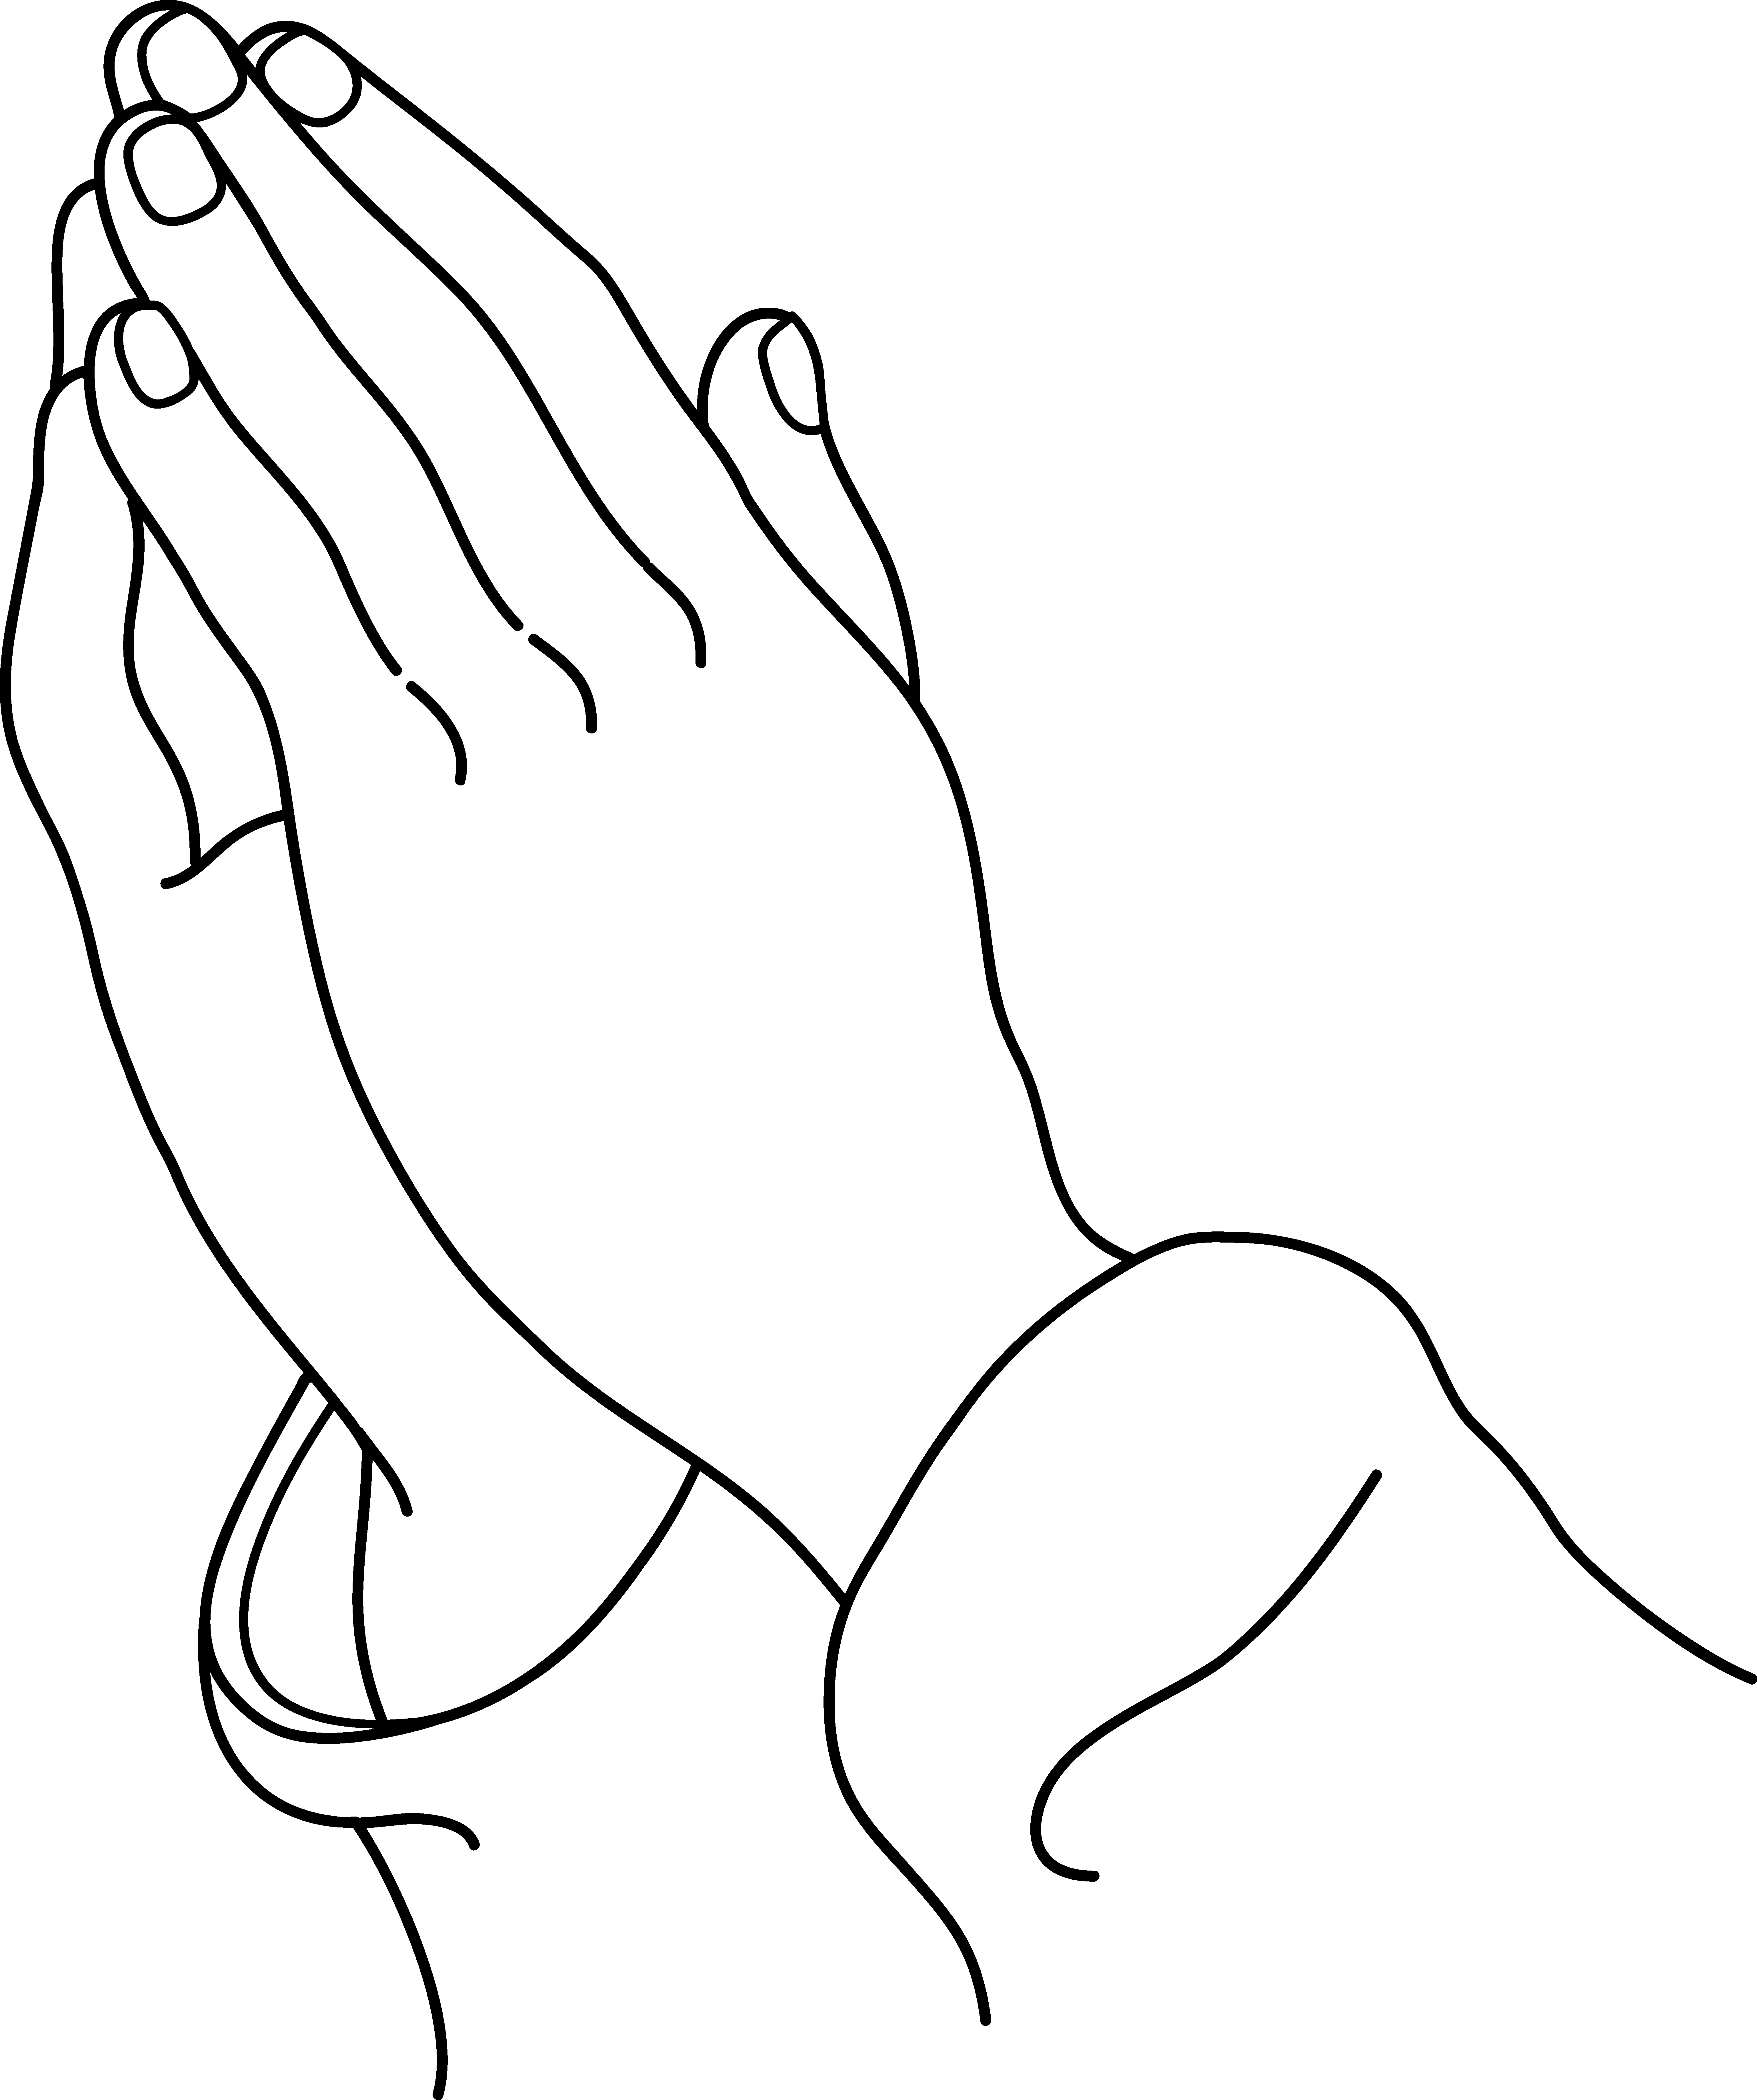 Prayer Clipart Black And White | Clipart Panda - Free Clipart Images